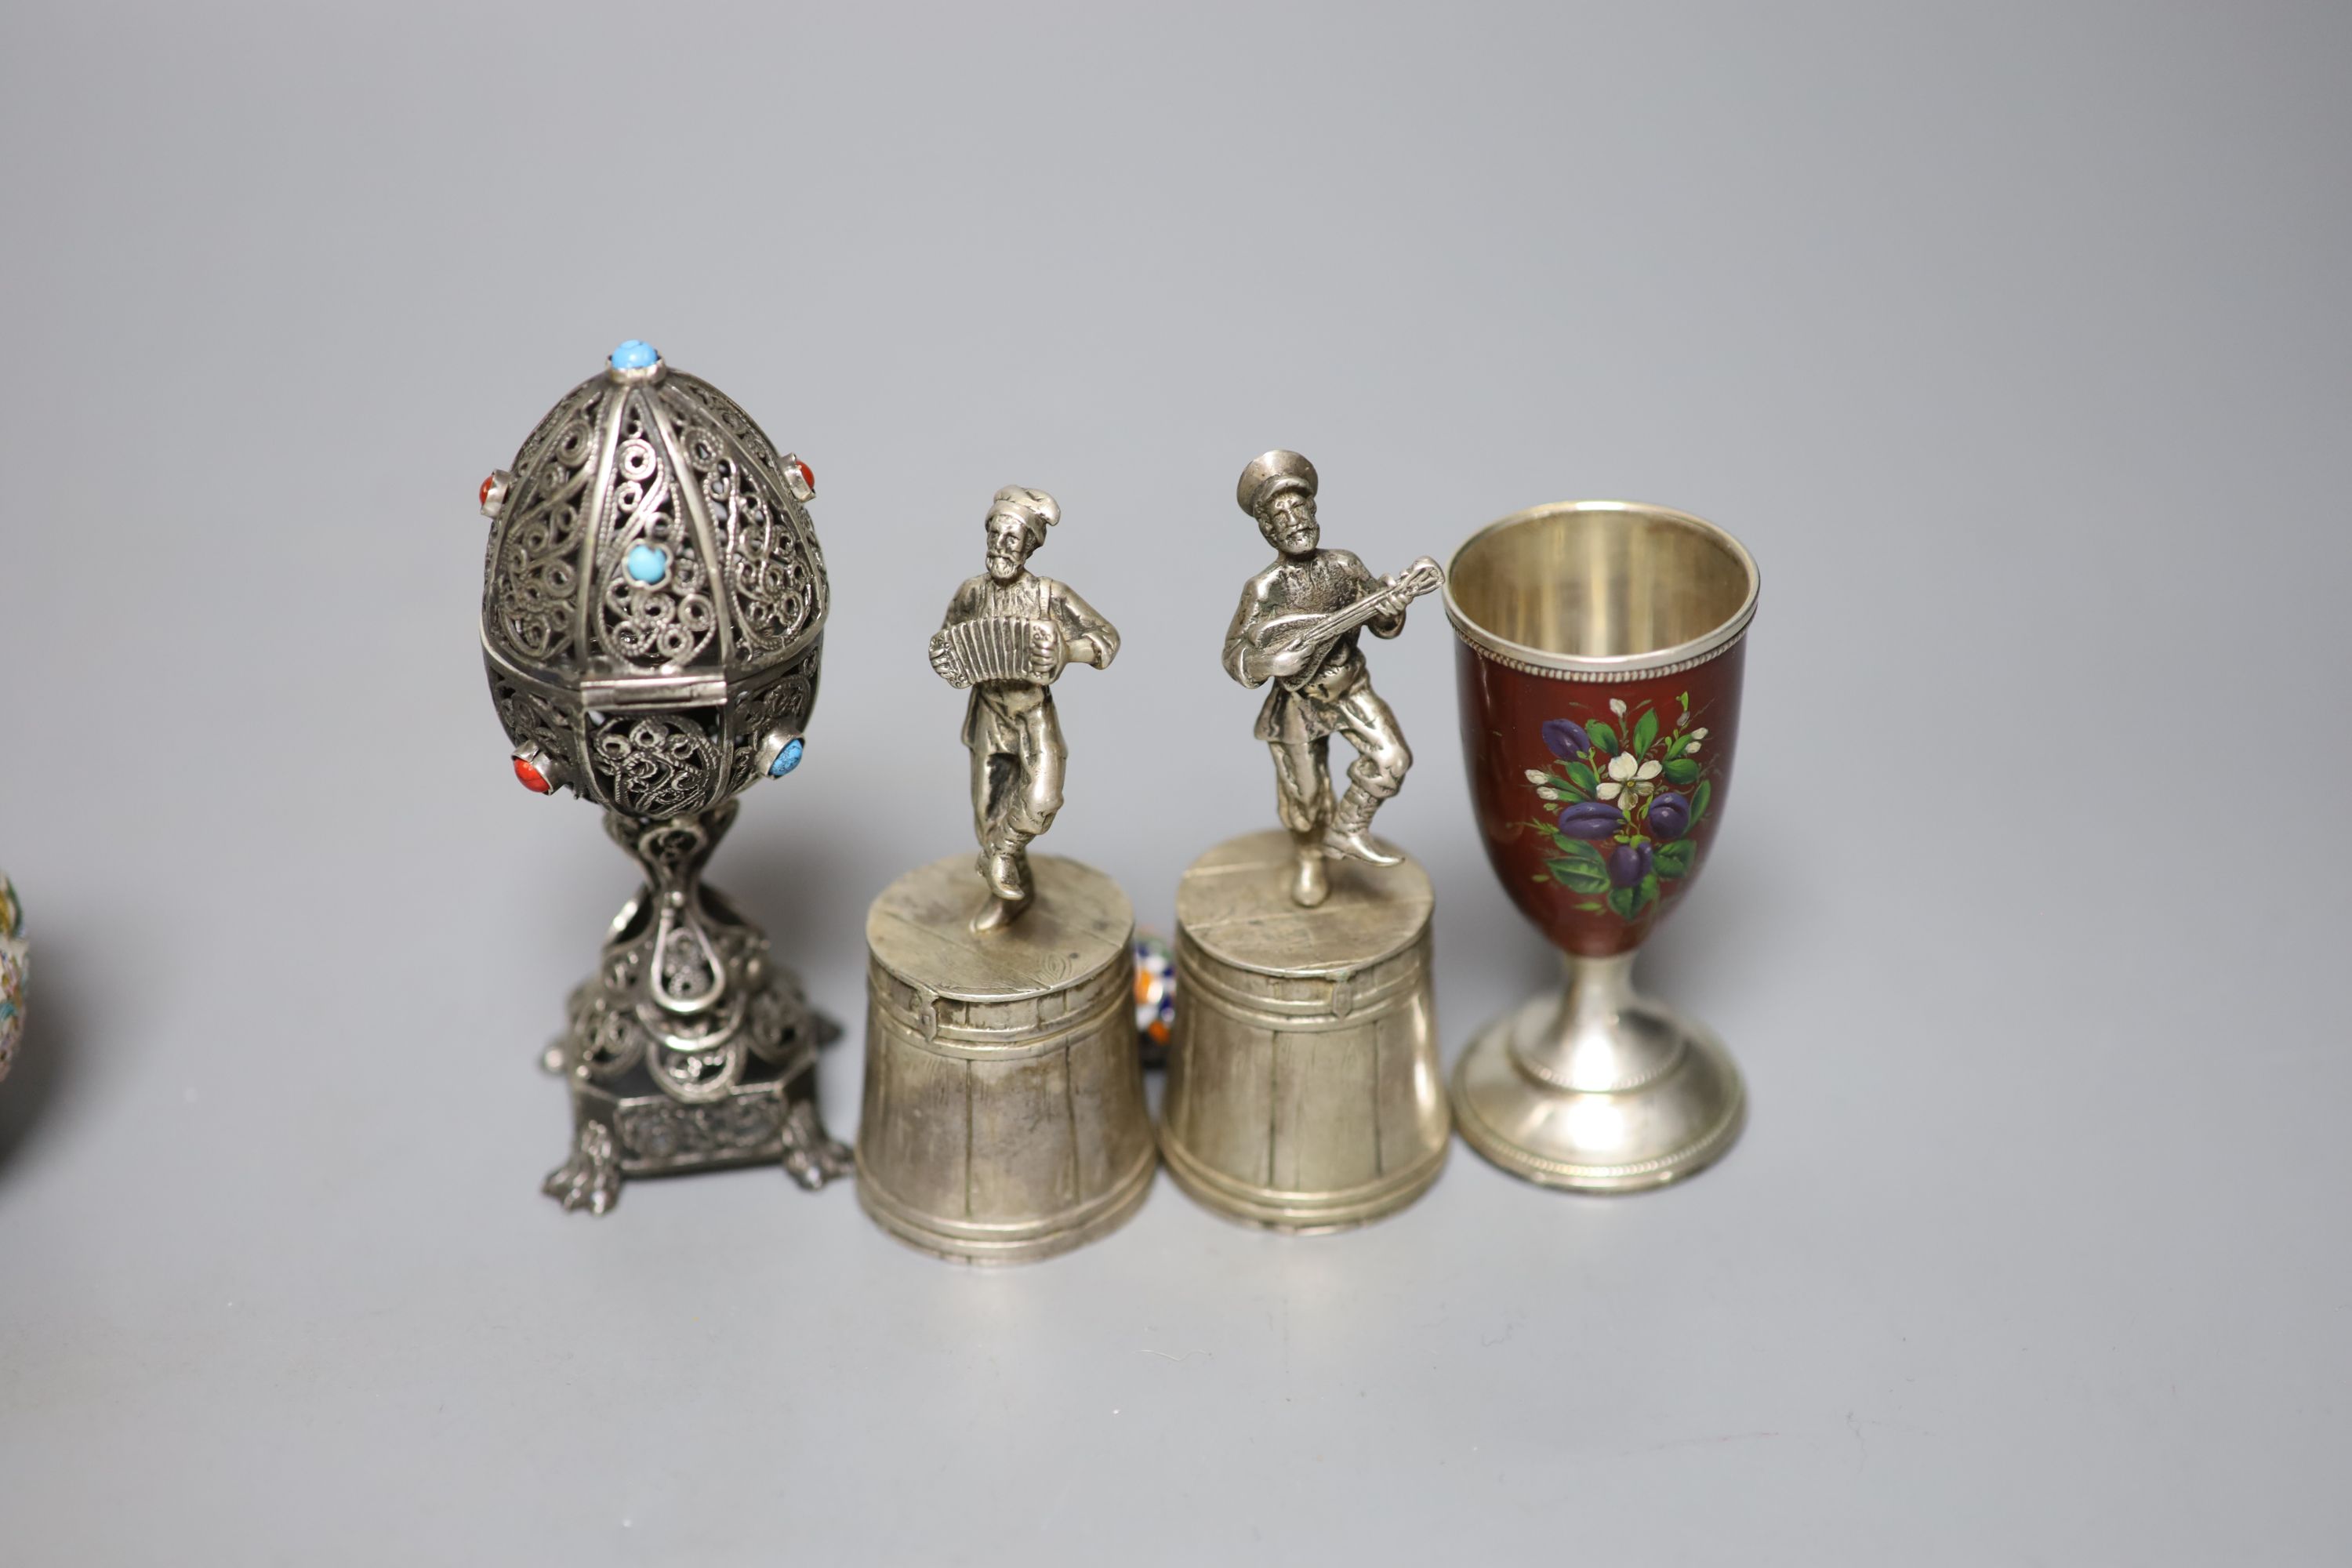 A group of Russian style white metal and enamel items including kovshs, egg pendants and small cups.